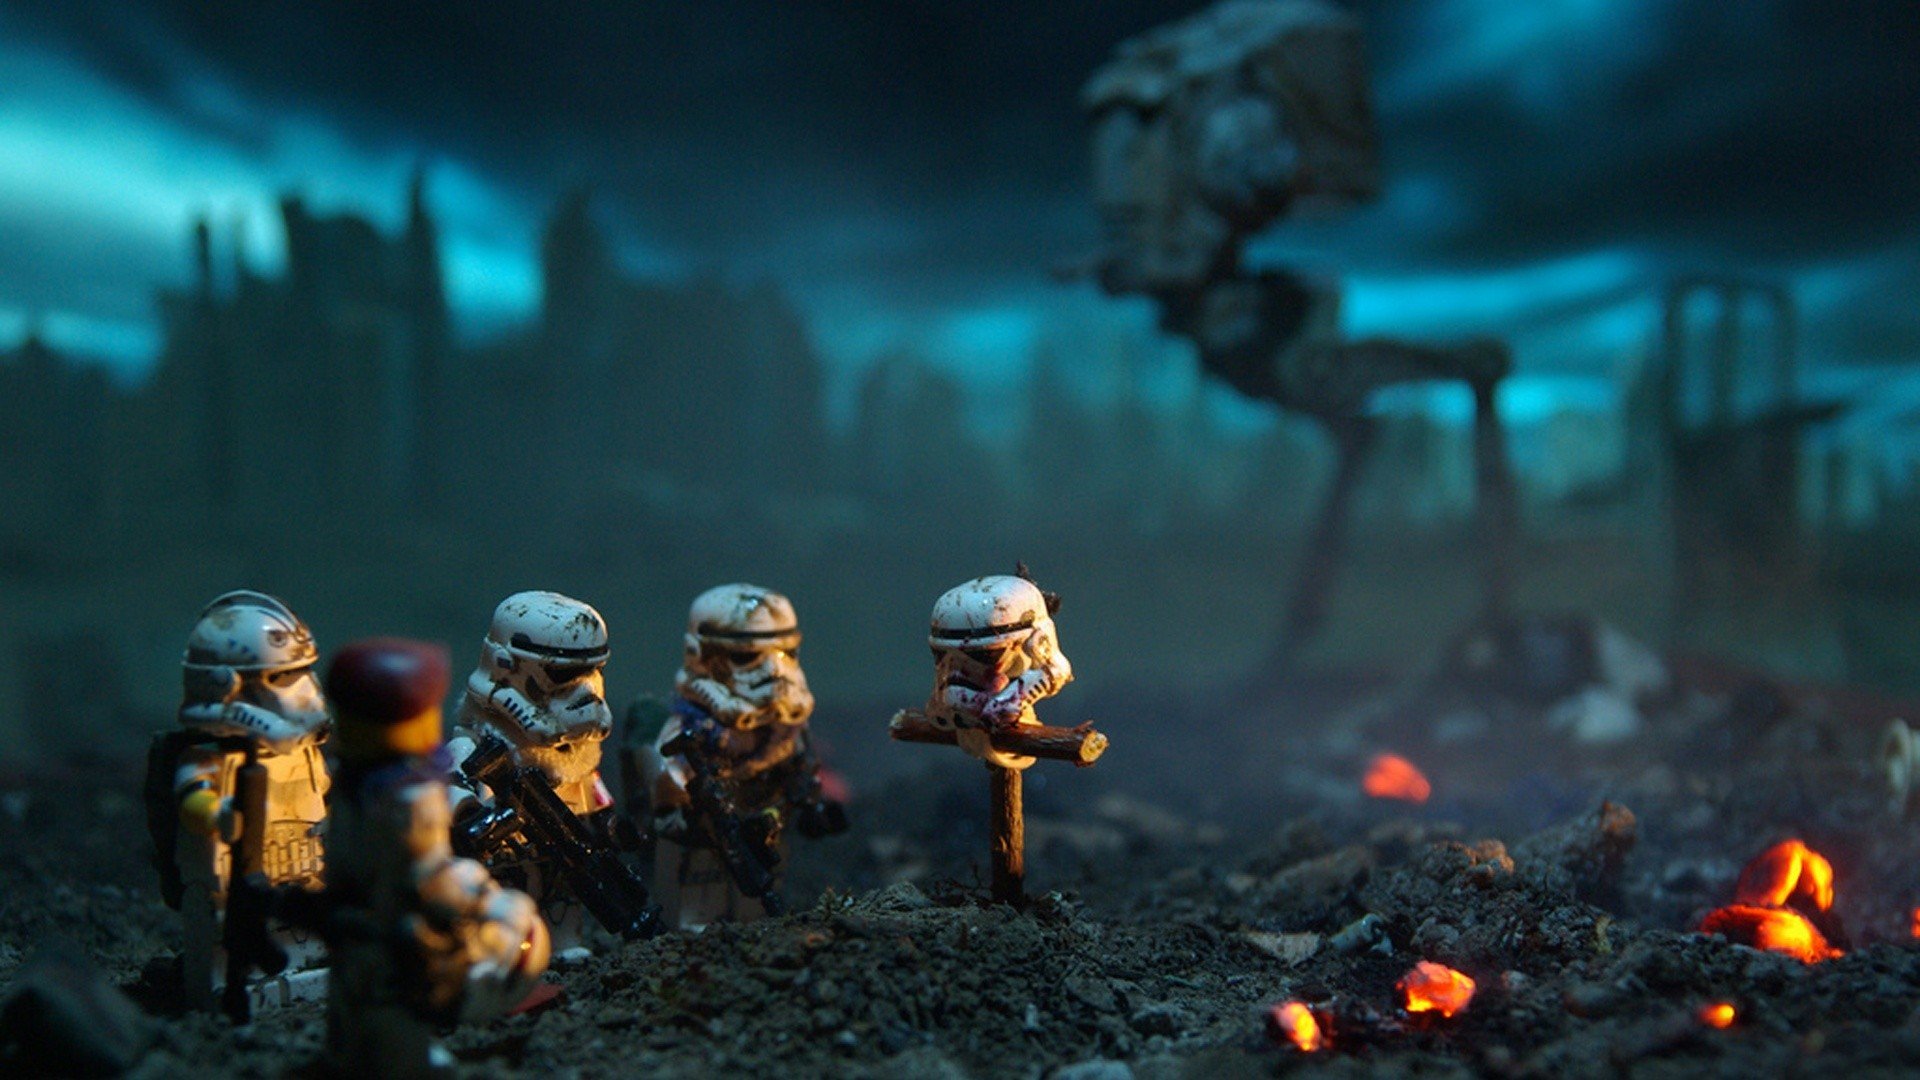 Star Wars Lego Cool Pictures HD Wallpaper Star Wars Lego Cool Pictures 1920x1080